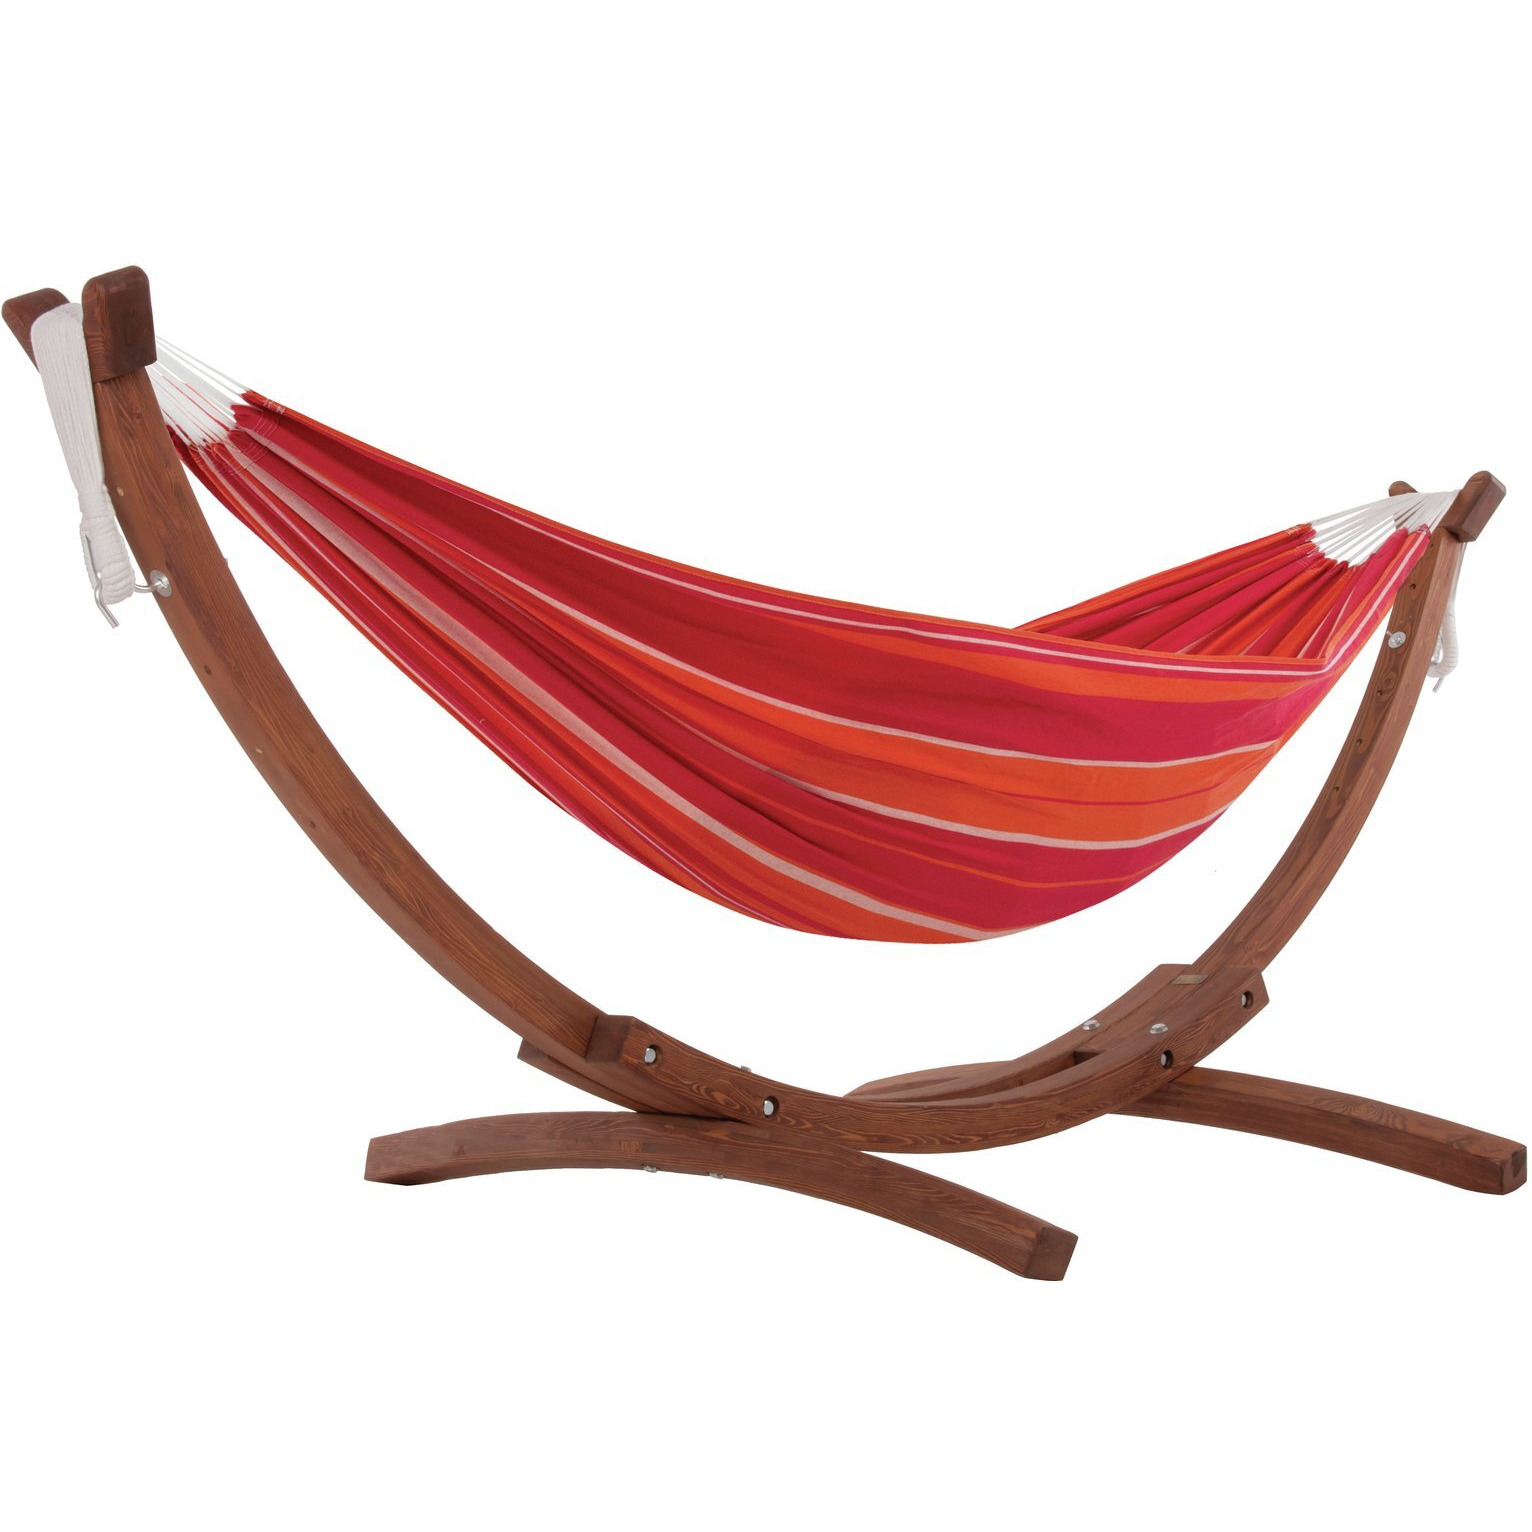 Vivere Mimosa Hammock with Wooden Stand - image 1